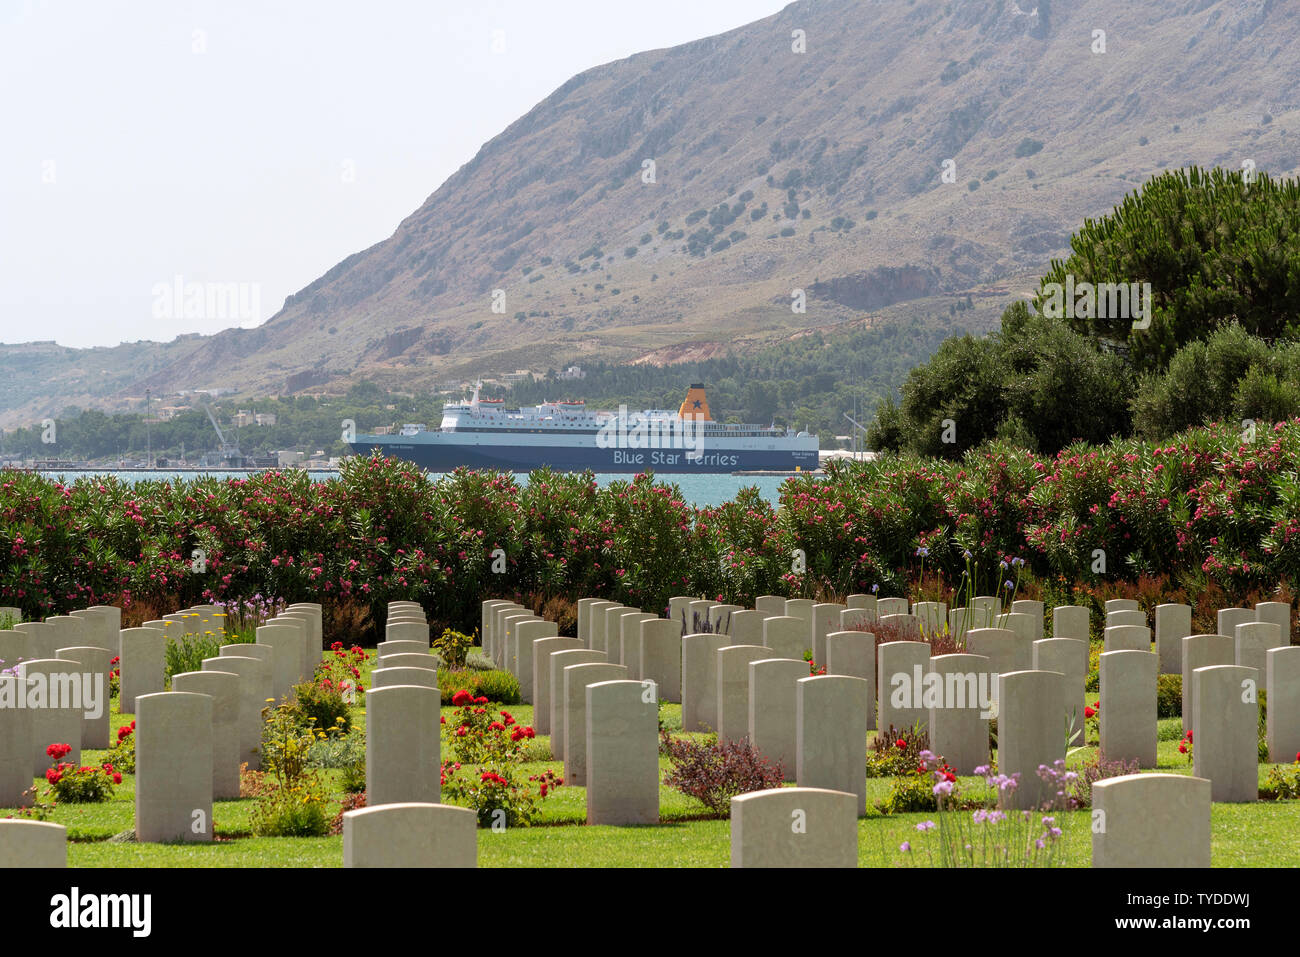 Suda Bay War Cemetery, Crete, Greece. June 2019. Looking towards the Port of Souda and a Greek ferry, the Blue Galaxy. Stock Photo